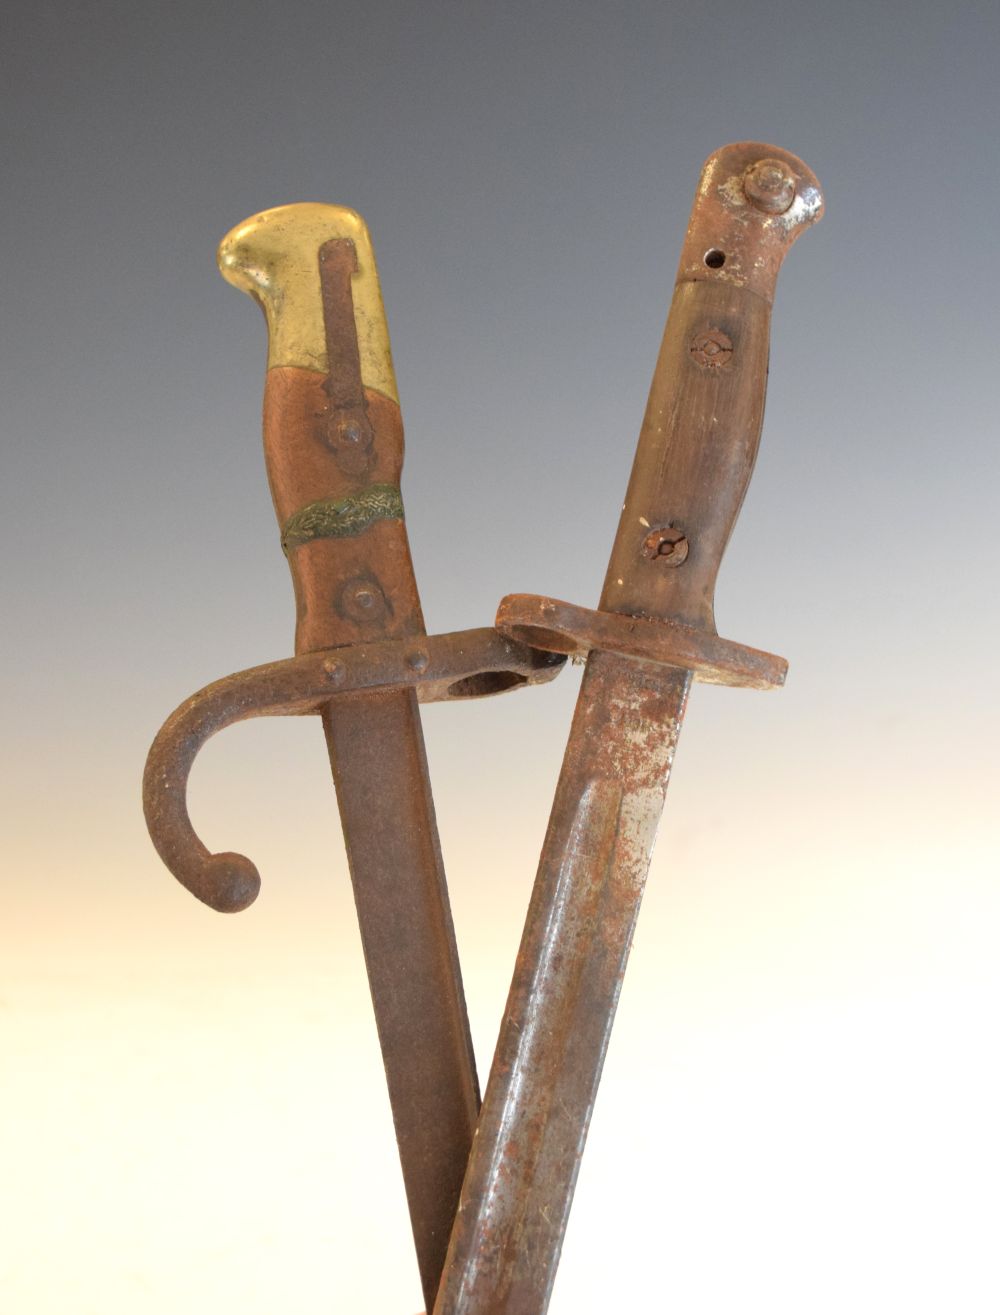 French rifle bayonet, blade 50cm long, together with British rifle bayonet marked '1907, Sanderson',